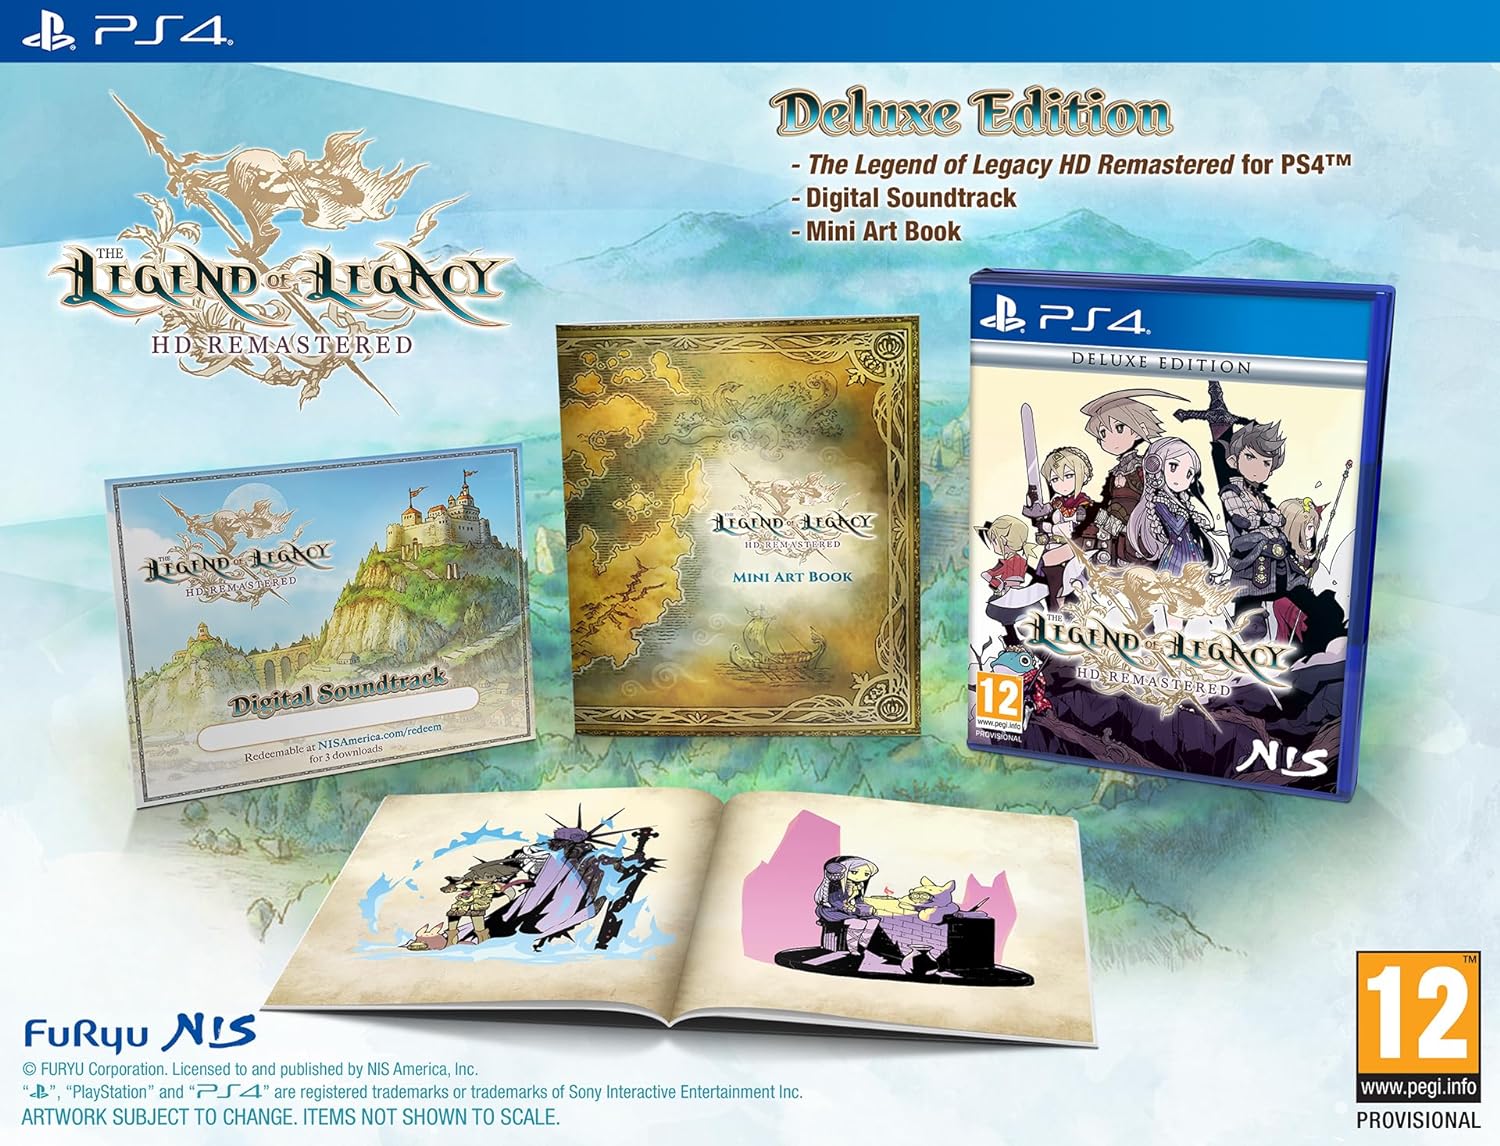 The Legend of Legacy HD Remastered - Deluxe Edition (PS4), NIS America